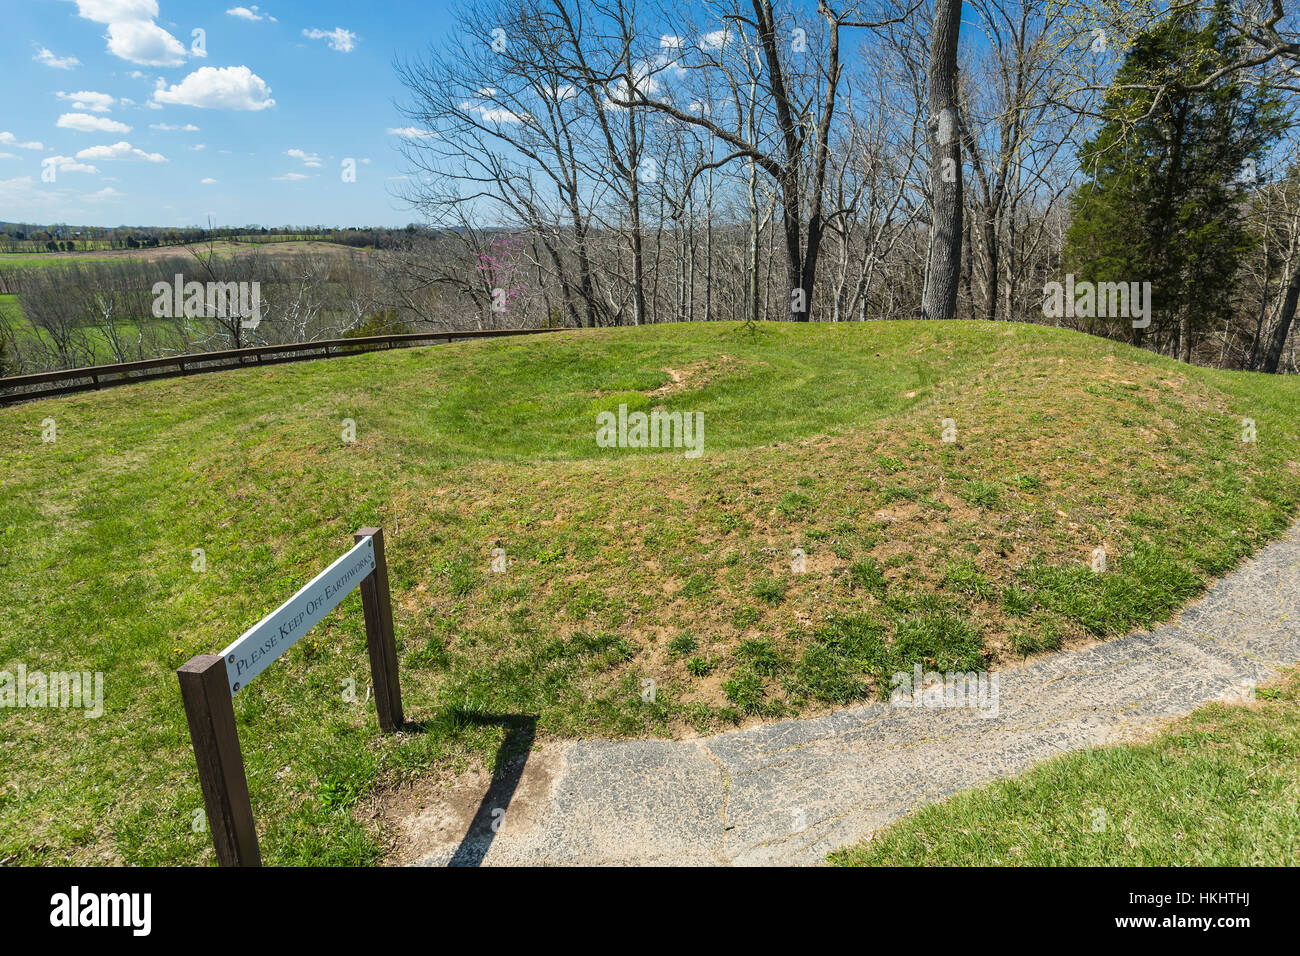 Detail of Great Serpent Mound, which snakes ¼ mile over the landscape at Serpent Mound State Memorial in Adams County, Ohio, USA Stock Photo